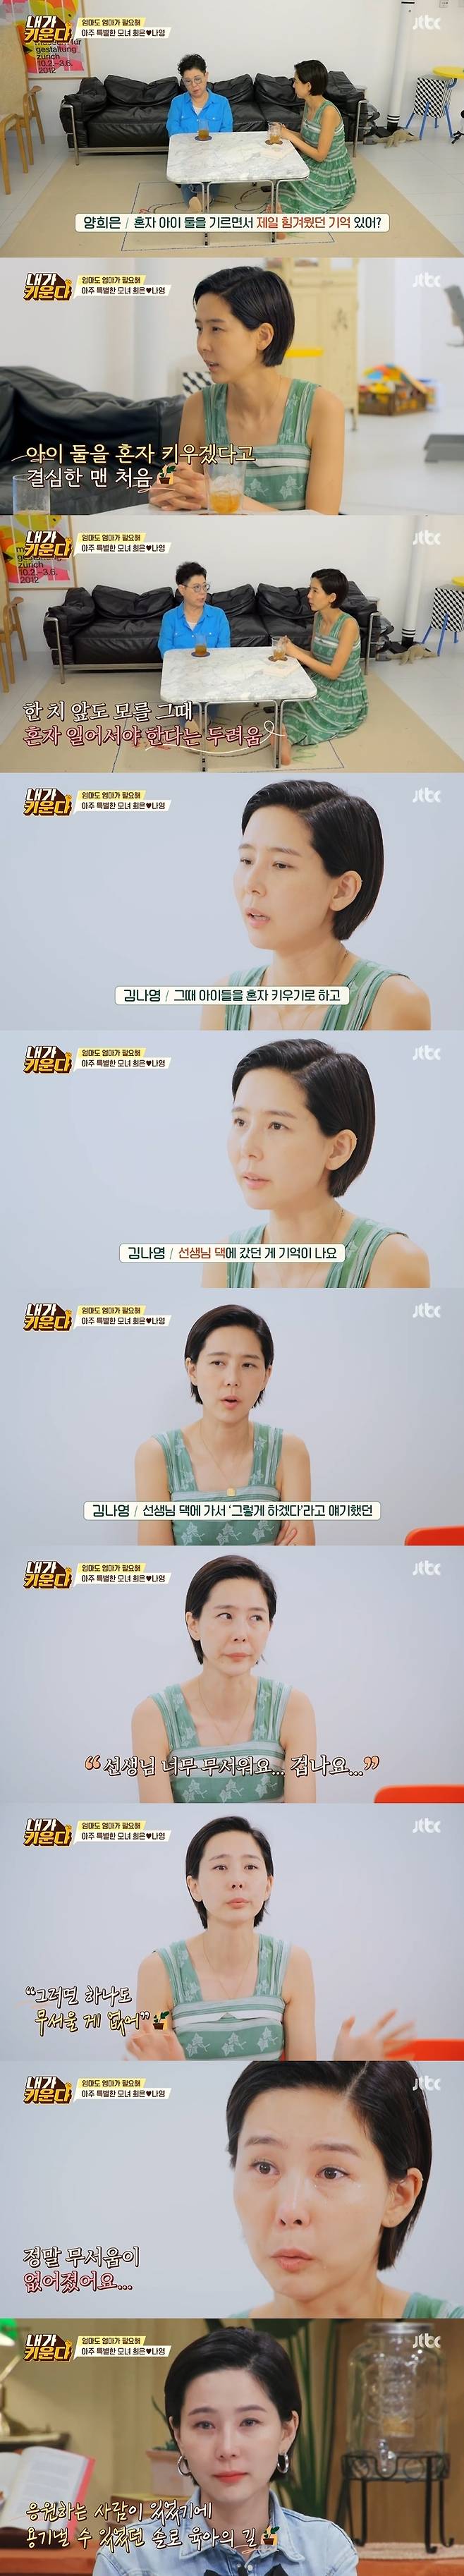 Broadcaster Kim Na-young and singer Yang Hee-eun said they were encouraged by Solo Parenting.JTBC Brave Solo Parenting – I raise it, which was broadcast on July 30, depicted Yang Hee-eun visiting Kim Na-youngs house.Kim Na-young has been cleaning the house with Shin-Urayasu Station, Lee Joon since morning.Kim Na-young explained, Shin-Urayasu Station, Lee Joon also likes it and it is a very special day for me.Kim Na-young prepared a trio of octopus for guests; Kim Na-young said: It was summer, so I wanted to prepare for the recreation.Shin-Urayasu Station wants to eat octopus while watching TV, so I prepared octopus. Kim Na-young asked Shin-Urayasu Station, Lee Joon, to clean the mountain octopus.But the mountain octopus came out of the bowl in the salt and flour attack and Shin-Urayasu Station was appalled, when Lee Joon grabbed the octopus collar and put it back into the bowl.Lee Joon has been nicknamed Yuri Lee Joon by her brother Shin-Urayasu Station, mother Kim Na-young, tears in her behavior.Is it Lee Joon we knew? Kim Gura admired.Kim Na-young said in an interview: I knew Shin-Urayasu Station would catch it, I was surprised Lee Joon caught it.Theres something Lee Joon cant predict, so its funny, I dont know if its my child, he laughed.Yang Hee-eun later appeared; Kim Na-young said, I depend a lot on him, who was a great force even when I was really hard.Im an early mother. So sometimes I think shes like a mother. Shes warm and she cares a lot. Shes like an adult.So I am leaning a lot with my heart. Yang Hee-eun recalled his first meeting with Kim Na-young, who said: I met him in 2012 when I was on Find a Delicious TV.Kim Na-young said, I was so pretty. I do not think I will be easy to look at anyone. It was scary because it was a scary image.Kim Na-young said: Once on Childrens Day, I gave him a little gift and a card, which was written on the card: A little is Childrens Day.I prepared it for the wounded child inside you. It felt like a pat. I felt it. I remember it. Yang Hee-eun said, The fact that you survive alone without an adult in the entertainment industry, that you can not say that you do not have your side.I dont have children, so I want to be the adult I need. I cant explain how I feel.I have a heart that I want Na Young to be my daughter, he said, making Kim Na-young.Yang Hee-eun really revealed a gift she bought herself as if her mother was coming home to play: from push-pops that children like to pop-pumps and watermelon rice cakes.Yang Hee-eun turned into a good grandmother after a charming greeting to Shin-Urayasu Station and Lee Joon, capturing the hearts of the children.Thanks to Yang Hee-euns good play of Shin-Urayasu Station and Lee Joon, Kim Na-young prepared corn pot rice, octopus horon and octopus tang.Kim Na-young said, I was sorry that it took a long time to treat my teacher well.Yang Hee-eun praised Kim Na-young food as soon as he ate the octopus holong, saying, Its not salty and delicious, its okay.Lee Joon stated that the dream was his brother Shin-Urayasu Station, and Shin-Urayasu Station called Lee Joon a dream and called Kim Na-young, Yang Hee-euns laughter.Later, the two shared a genuine story: Kim Na-young said, It helps housework these days, its really good at washing dishes.Shin-Urayasu Station also washs Lee Joon, and if I see the way Im struggling, I can see what Im trying to do, he said.Yang Hee-eun said, I am sick of Shin-Urayasu Station going into the irony, it is natural to have no irony, but to look at my mother.I think it was a lot of hardship and hardship, but you were big and the children were big. Do you have the memory that was the hardest when you raised two children alone? Kim Na-young said: The first time was the hardest: I thought a lot at first: Can I do two kids alone? I was so scared.It was really dark then, he replied.Kim Na-young said in an interview, At that time, I decided to raise my children alone and went to my teachers house.I remember going to your house and saying, Ill do that. And then I remember the rice I ate. I told you, Im so scared. Im scared.The teacher said, Just listen to what your heart says quietly, and then there is nothing to be afraid of. I was really scared. Yang Hee-eun said: My mother also had a divorce and three daughters, which was quick and accurate, unlike the decisions made in those days, which was amazing, but thats right.I cant say right and wrong, right and wrong, but I think Im doing well now with Na Young.I could have lived close to her. I saw a book by Na Young. Before elementary school, she left the world.It was written that he lived by calling his homeroom teacher Teachers Mom. Through a book written by Na Young, he became better aware of Na Young.I thought, I want to be her mother, she said as she read the book.My mothers presence is so great because she has a baby, Kim Na-young is a really nice person, Chaerim praised, and Kim Na-young was a bit of a bitch.Kim Na-young said, Kim Hyun-sook lives with his parents and Cho Yoon-hee lives with his sister. I envy him.Kim Na-young sent a video letter to Yang Hee-eun, who said: Thank you so much, thank you for being here firmly; I hope you are healthy.I want you to be around for a long time. So I can do well. Kim Na-young and Yang Hee-eun were impressed by the special mother-daughter relationship.